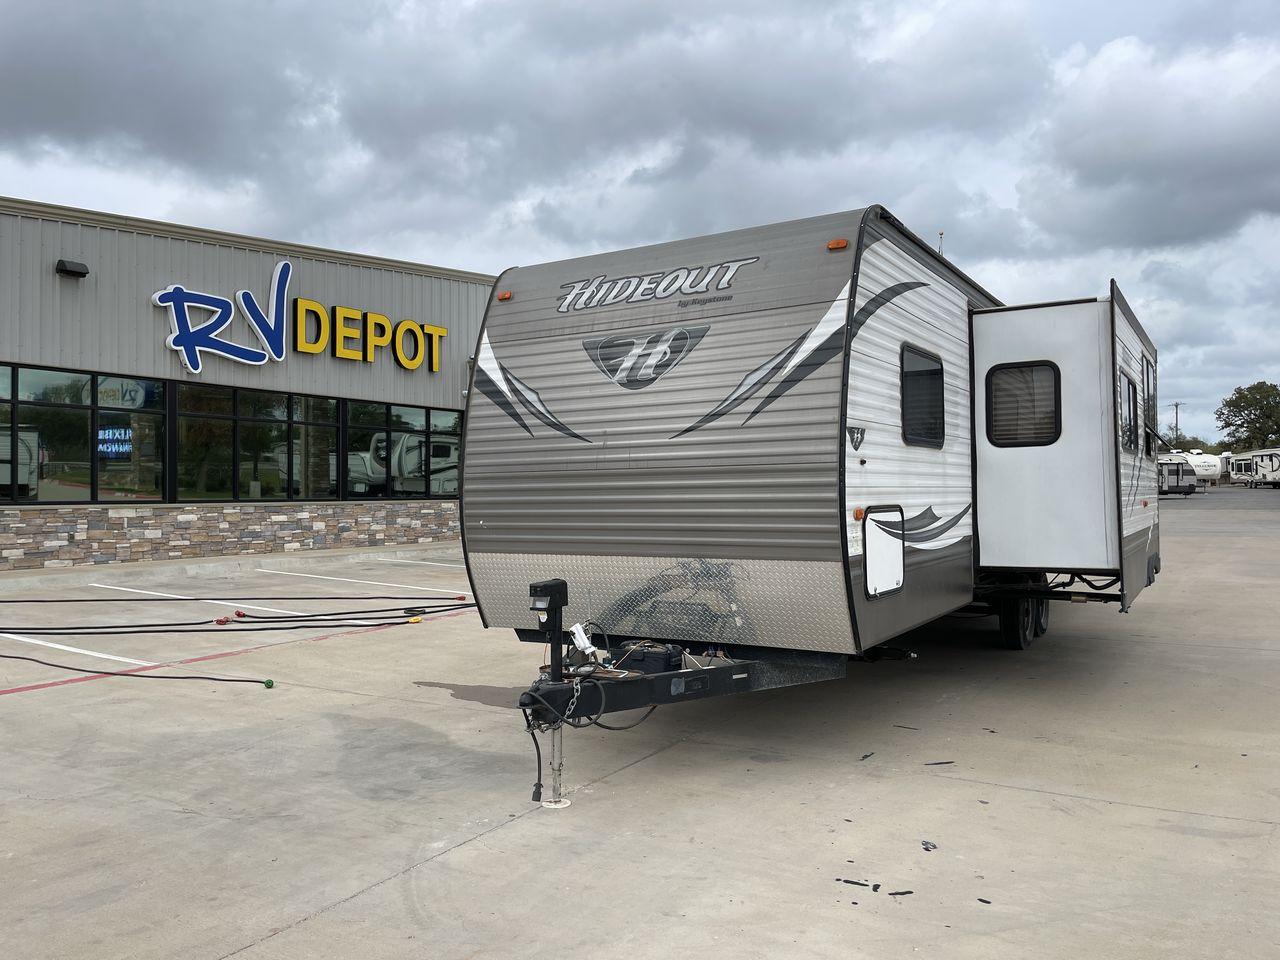 2015 KEYSTONE HIDEOUT 29BHS (4YDT29B23F7) , Length: 34.25 ft. | Dry Weight: 7,225 lbs. | Gross Weight: 9,675 lbs. | Slides: 1 transmission, located at 4319 N Main St, Cleburne, TX, 76033, (817) 678-5133, 32.385960, -97.391212 - Photo #0